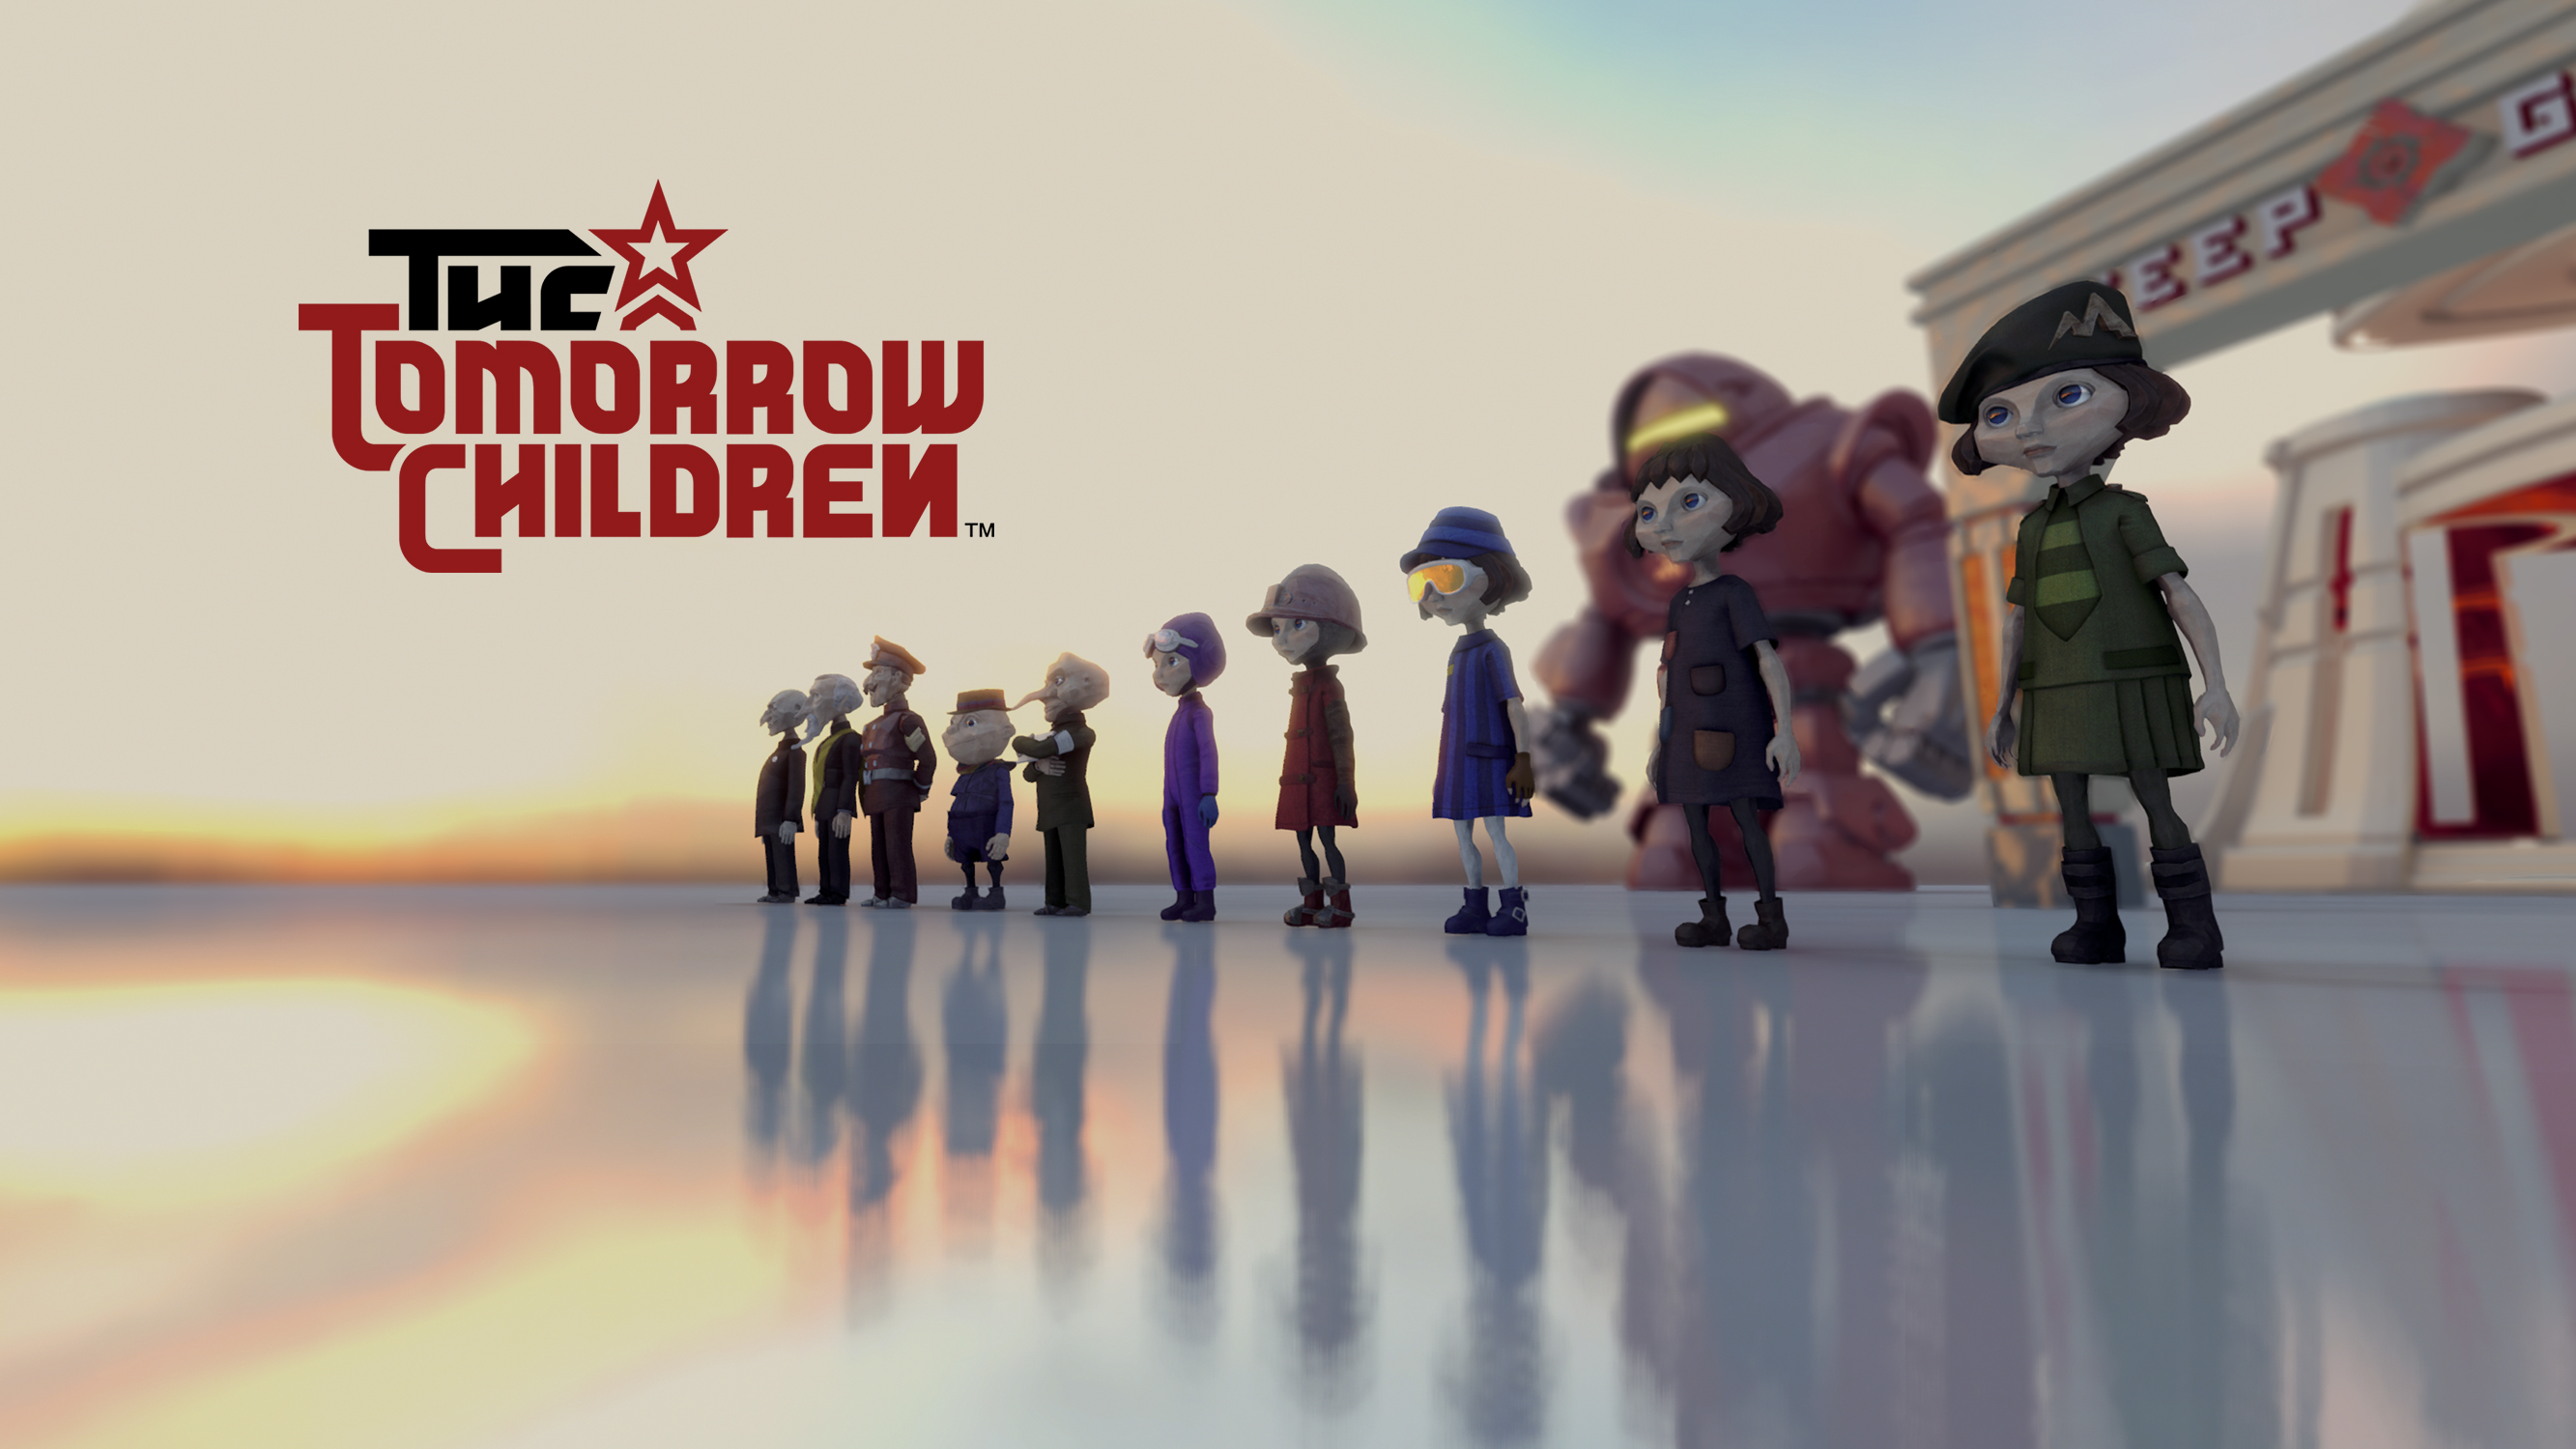 Video Game The Tomorrow Children HD Wallpaper | Background Image